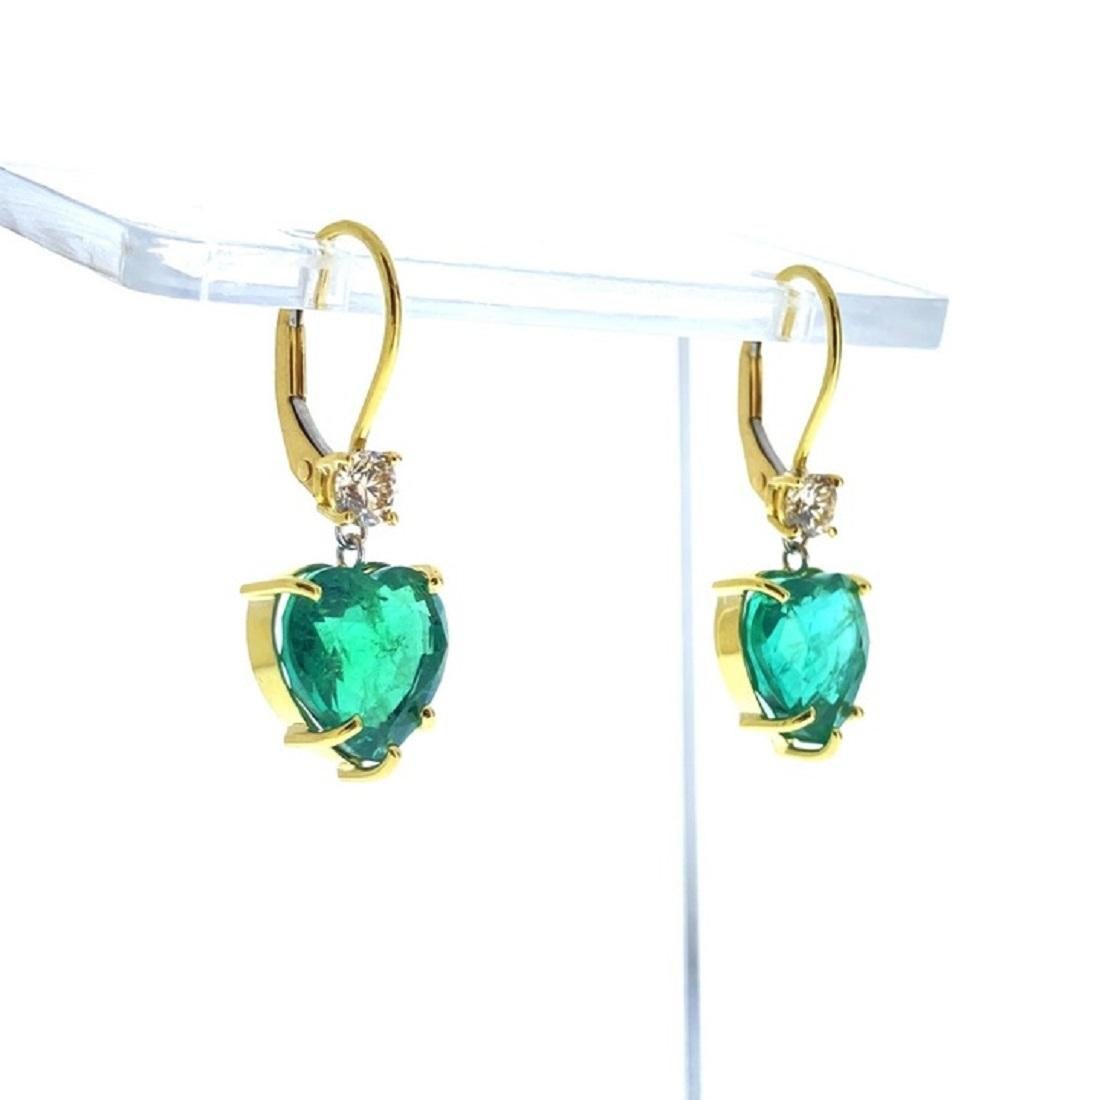 The 7.08 carat Heart Shape Green Emerald Earrings in 18K Yellow Gold are a dazzling and romantic pair of earrings that combine classic elegance with a burst of vivid color. These earrings feature two breathtaking heart-shaped emerald gemstones,